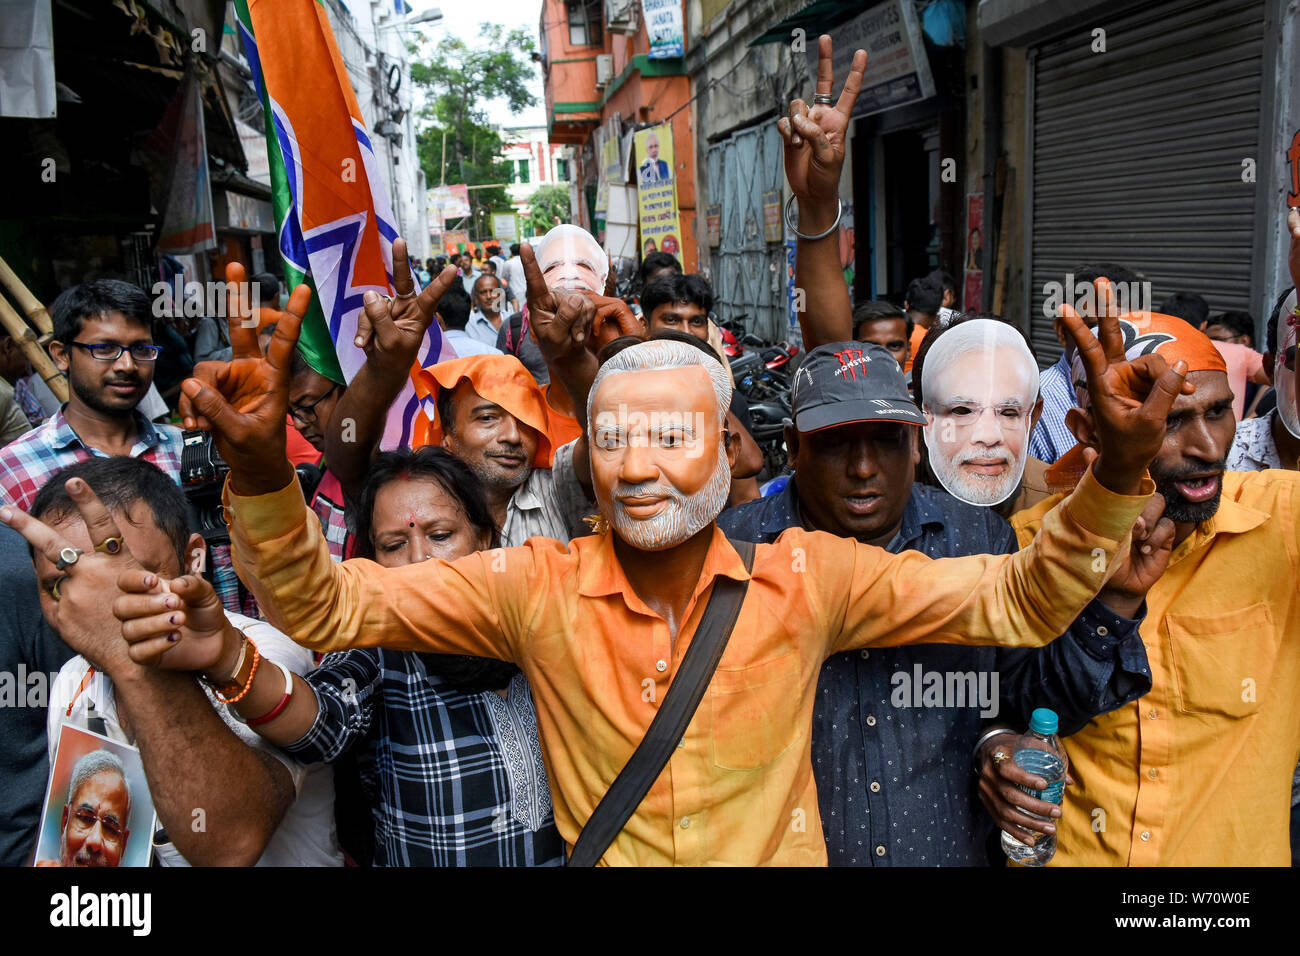 Celenration of BJP supporters after their landslide victory in Lok sabha election 2019. Stock Photo